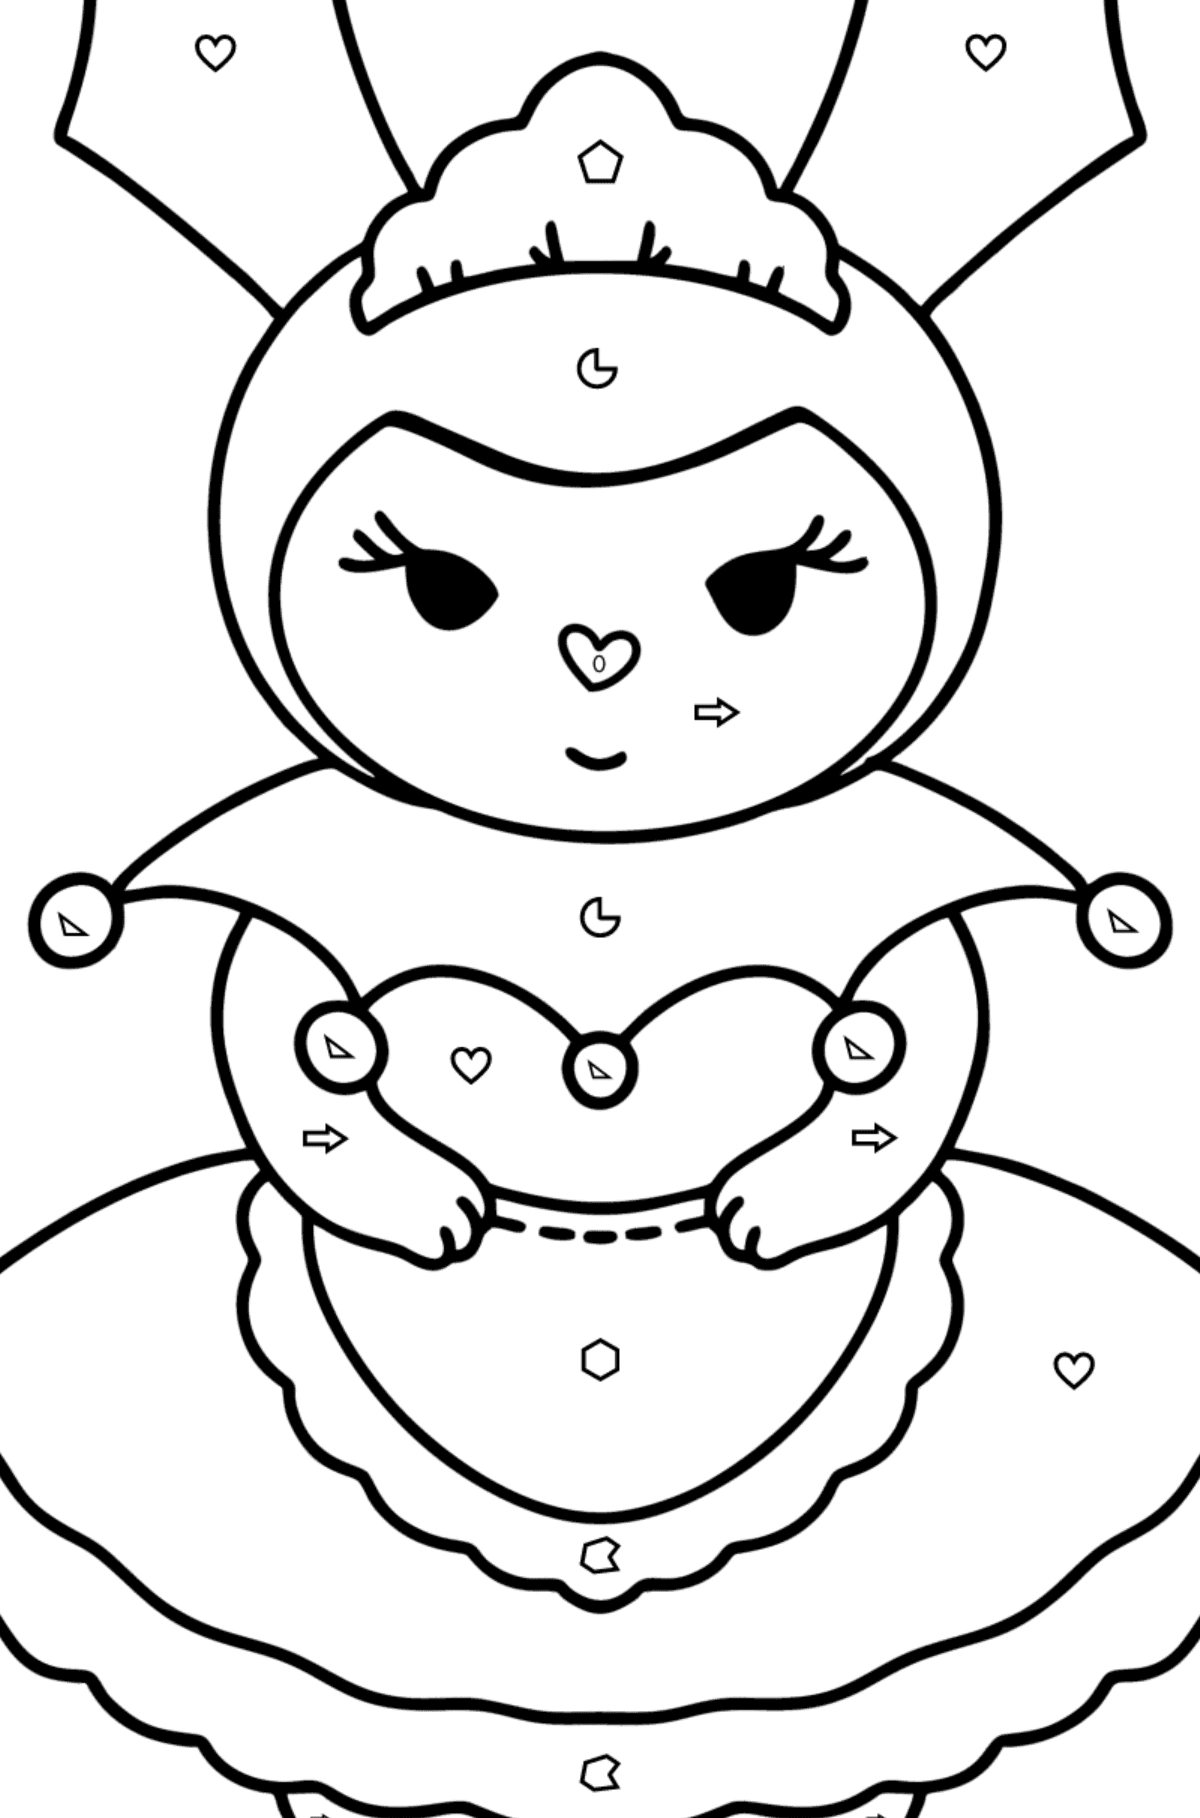 Hello Kitty Kuromy coloring page - Coloring by Geometric Shapes for Kids